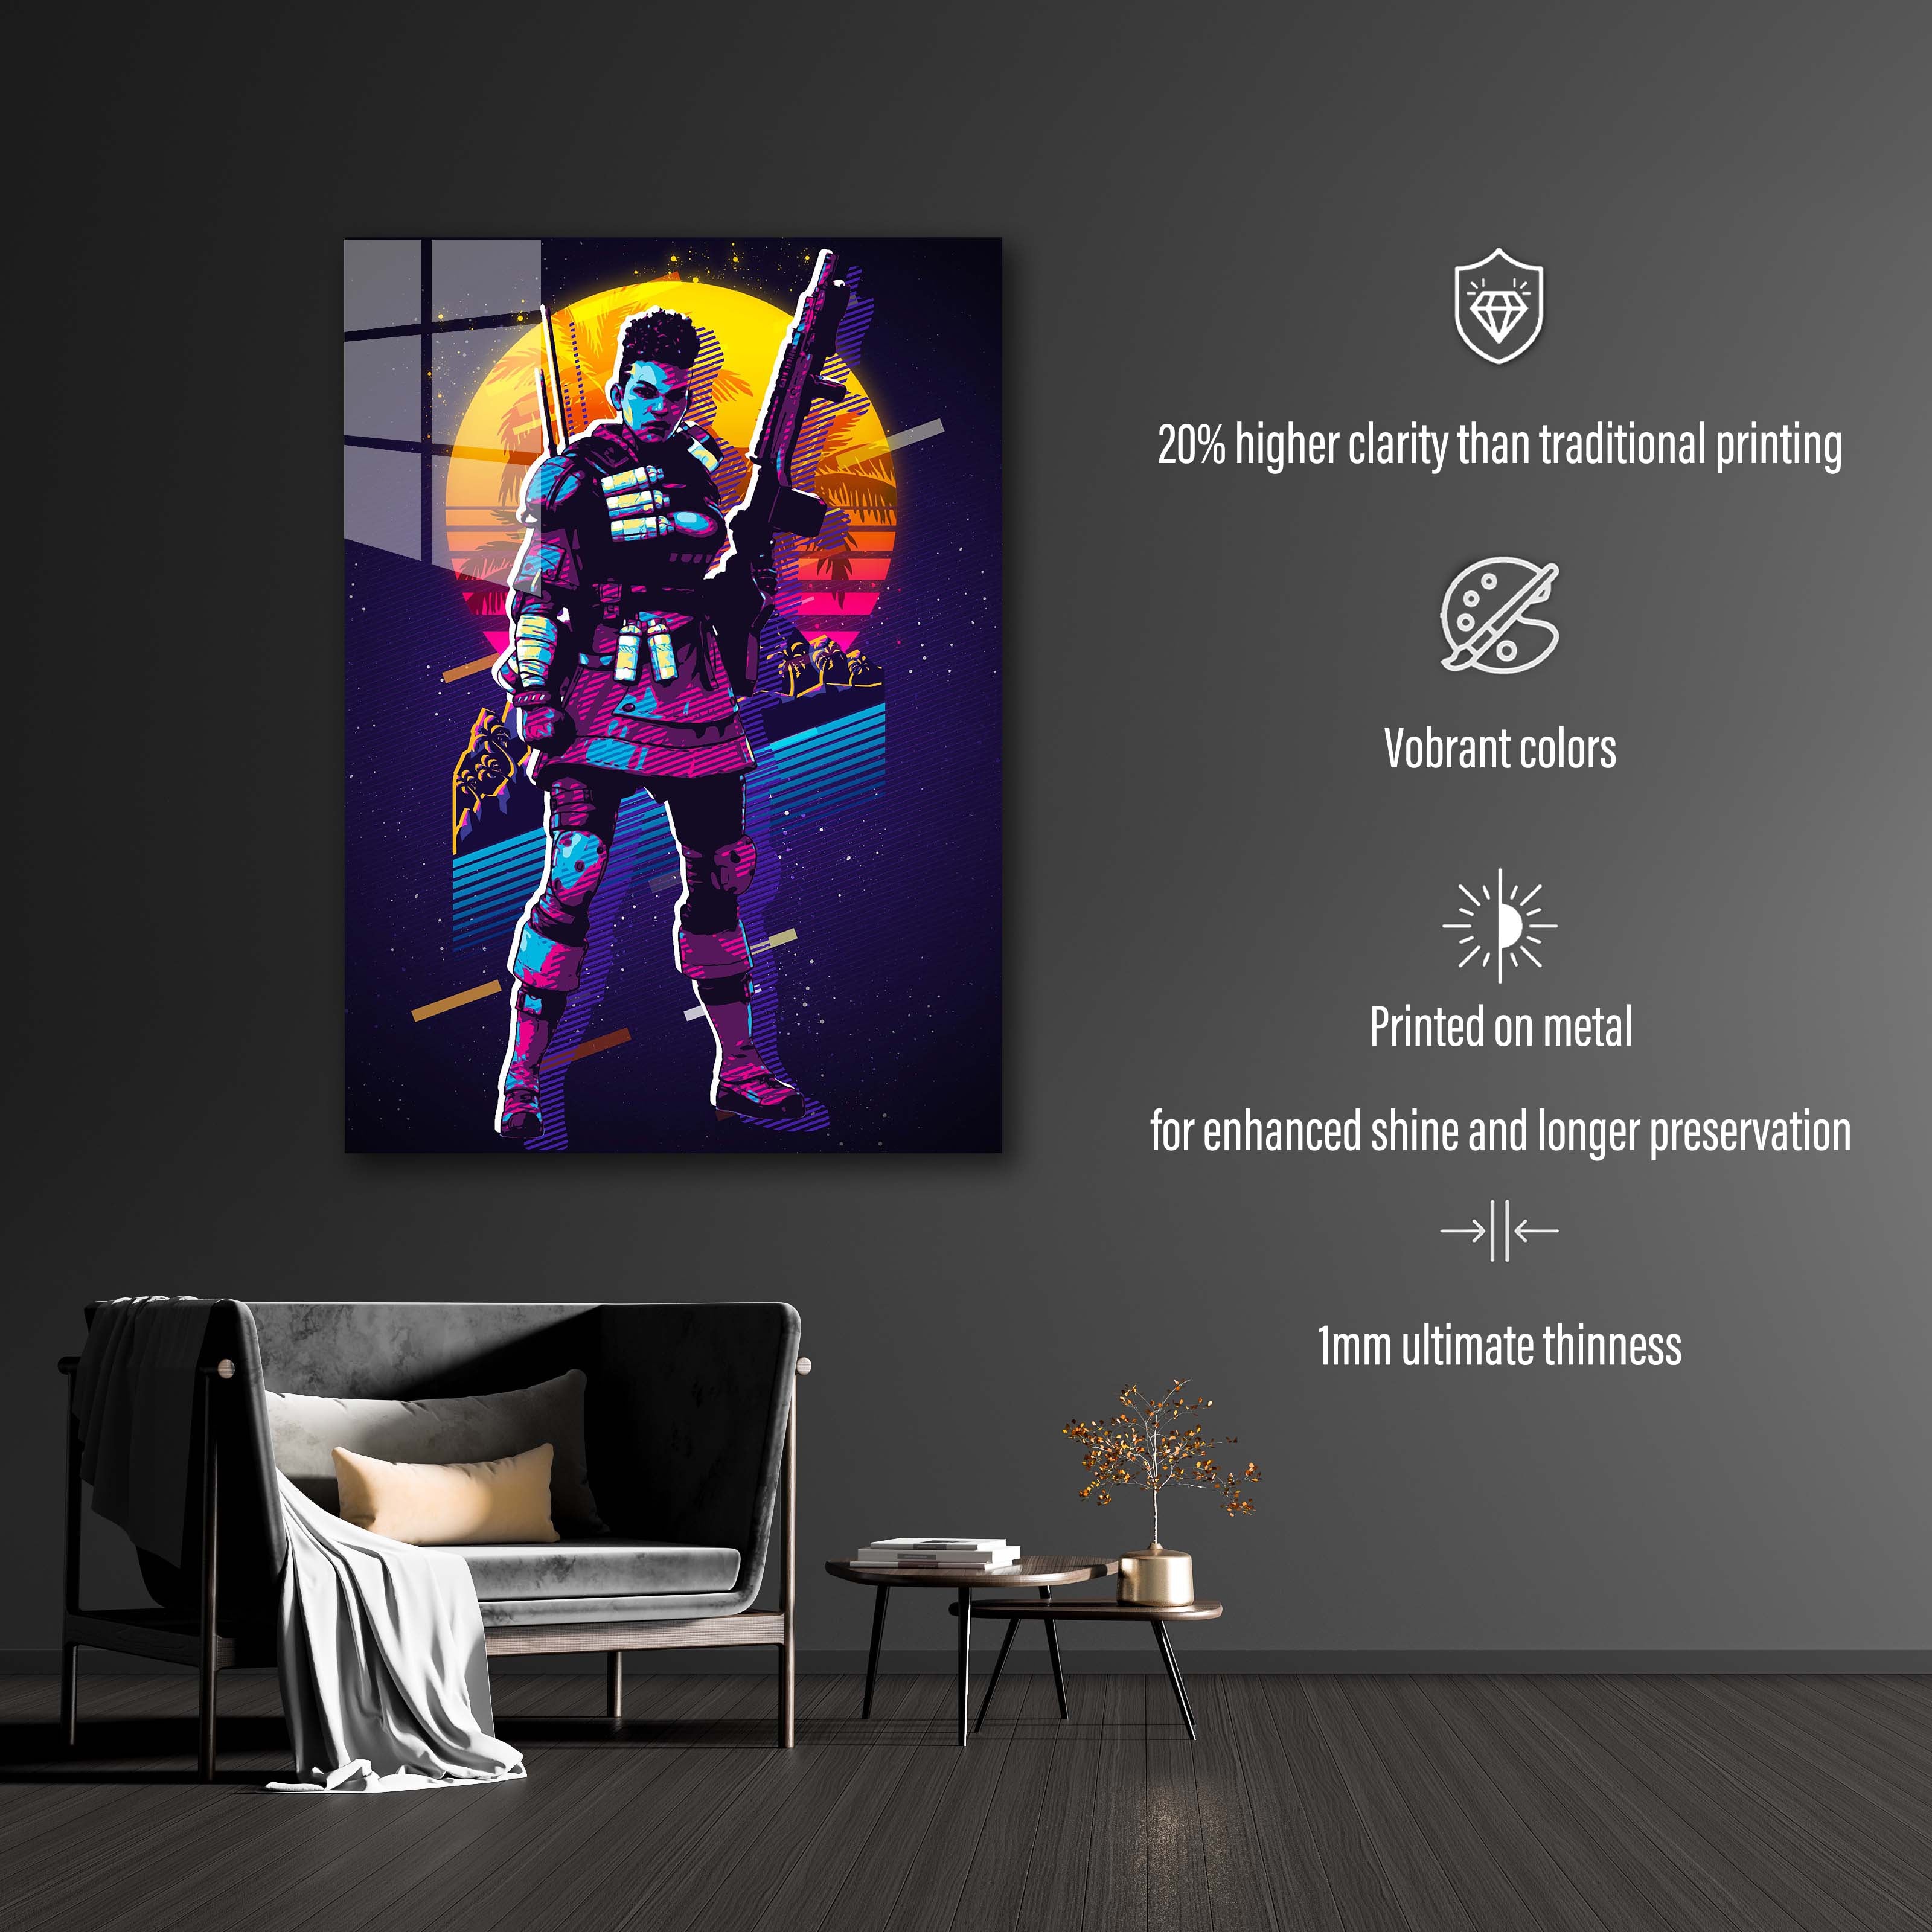 Bangalore Apex Legends -designed by @My Kido Art